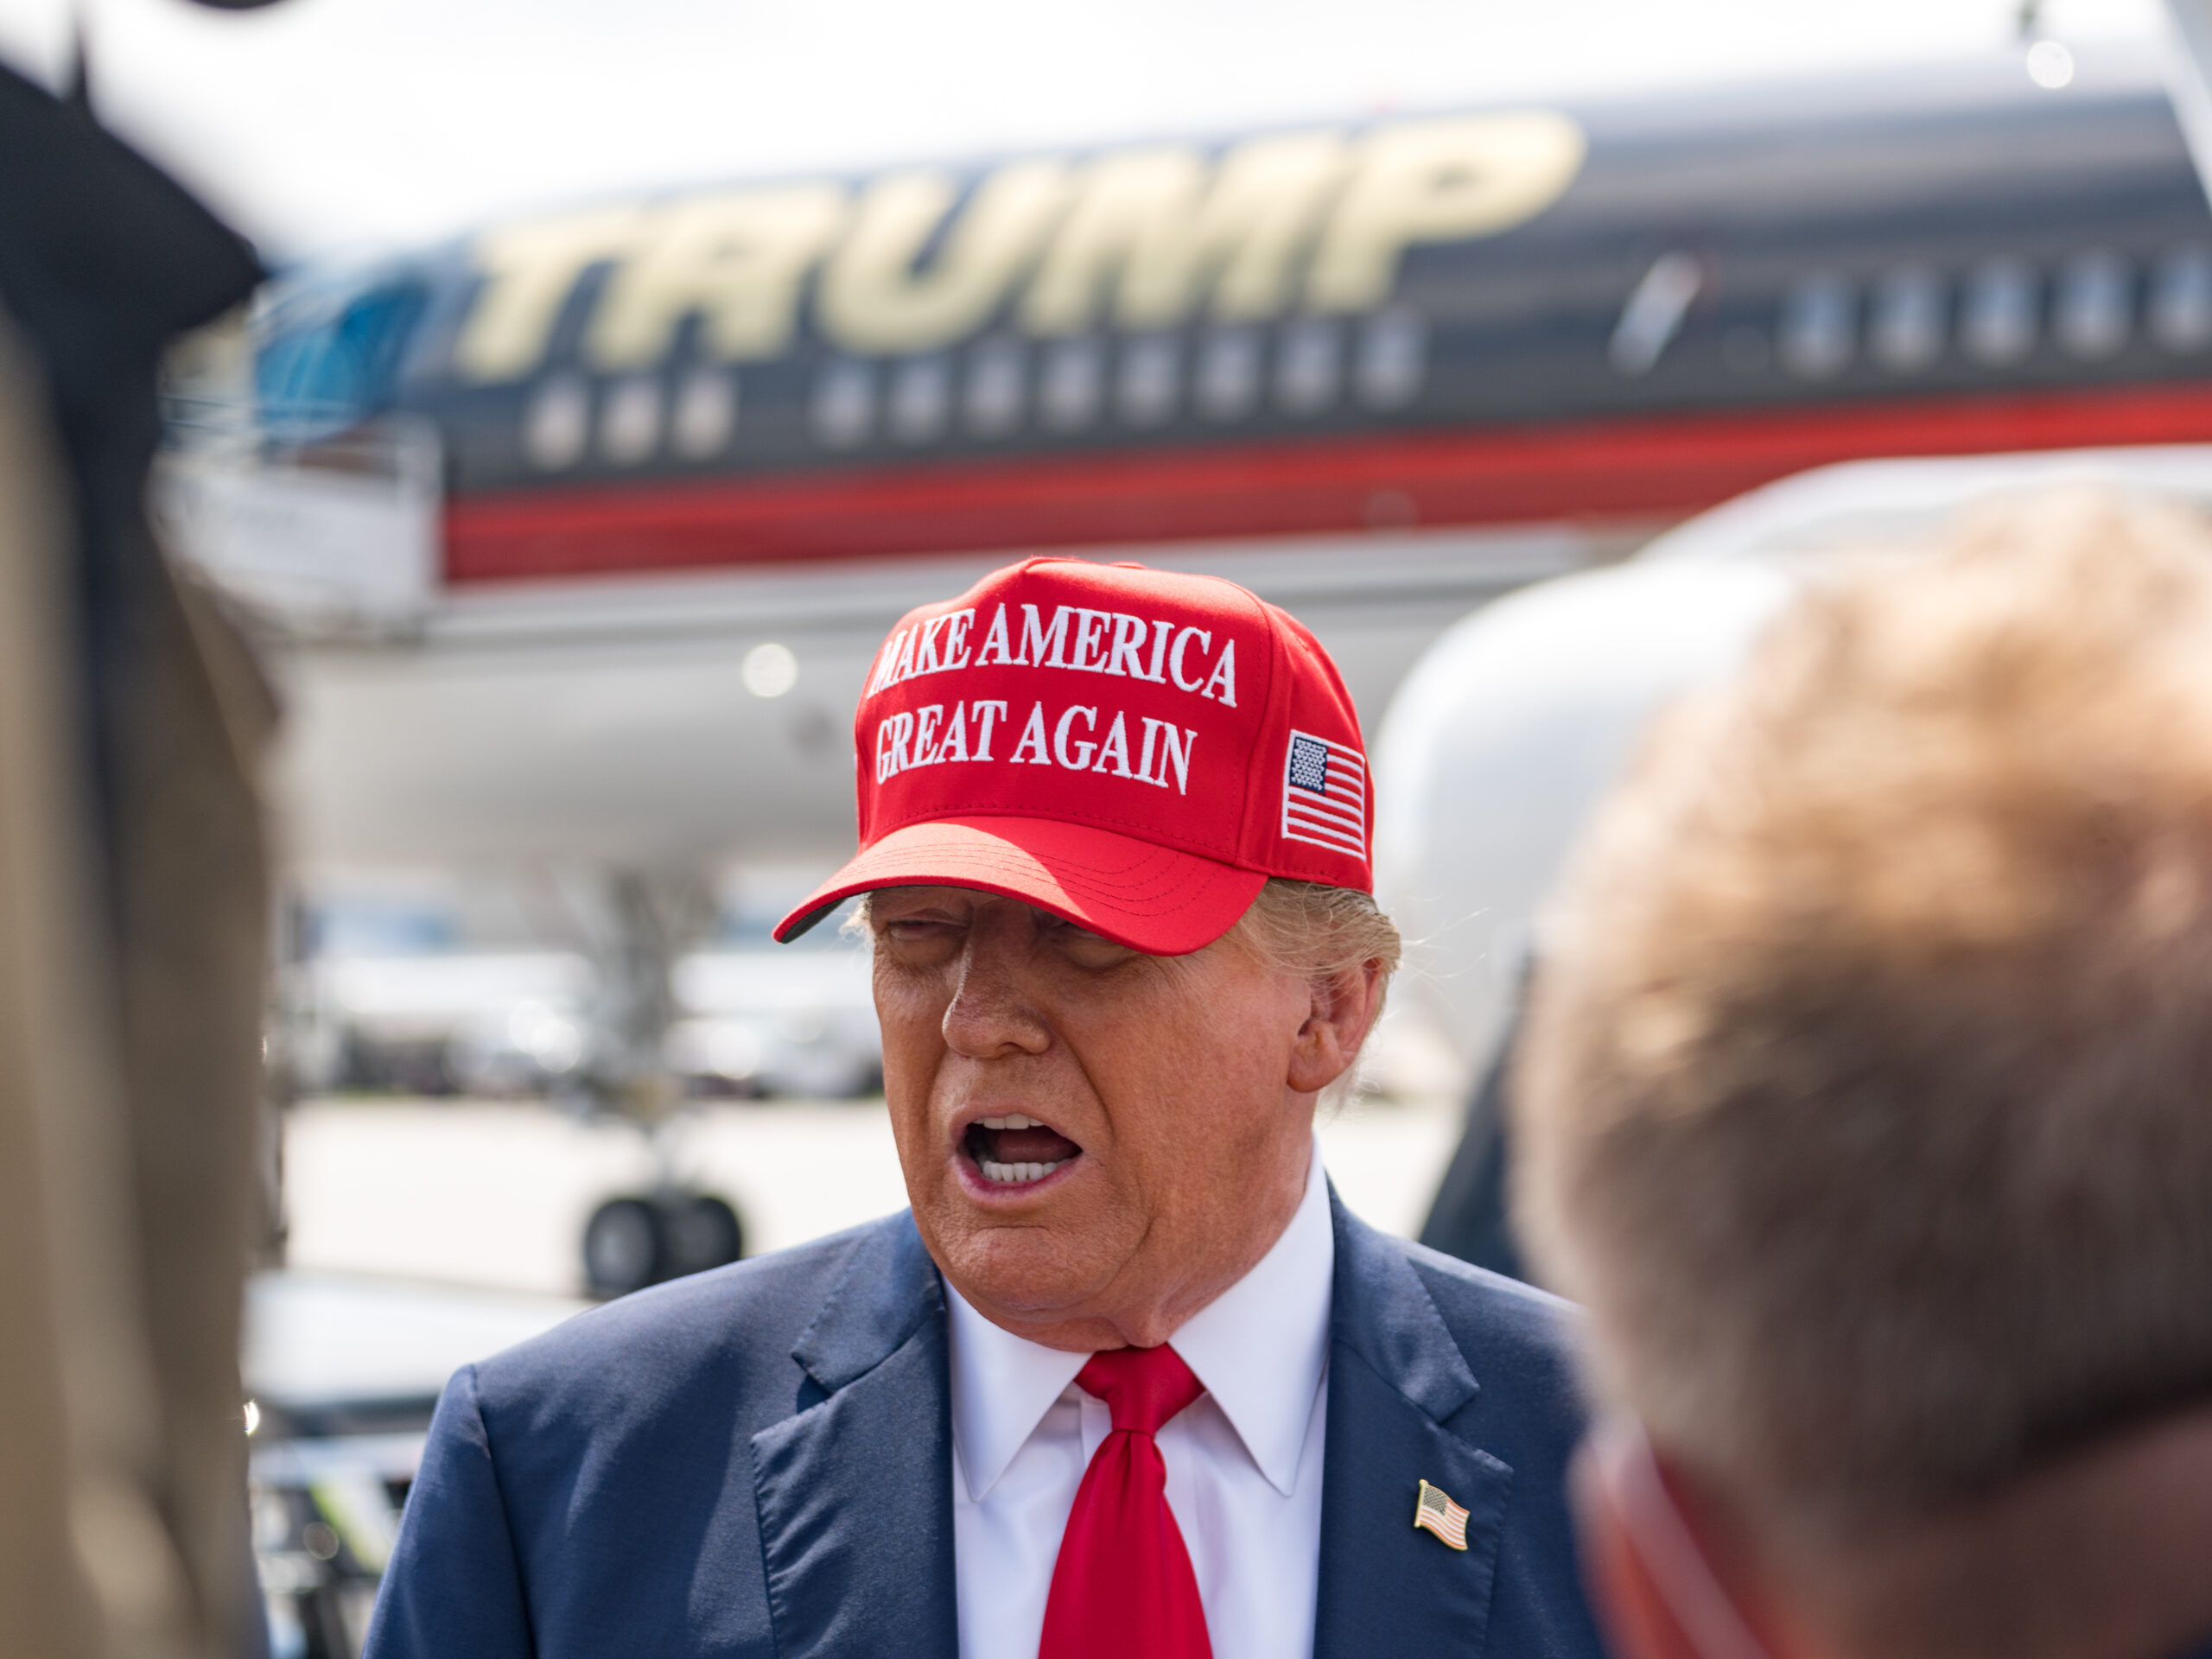 Former President Donald Trump speaks to the media as he arrives at the airport on Wednesday in Atlanta, Georgia. Trump is visiting Atlanta for a campaign fundraising event he is hosting.